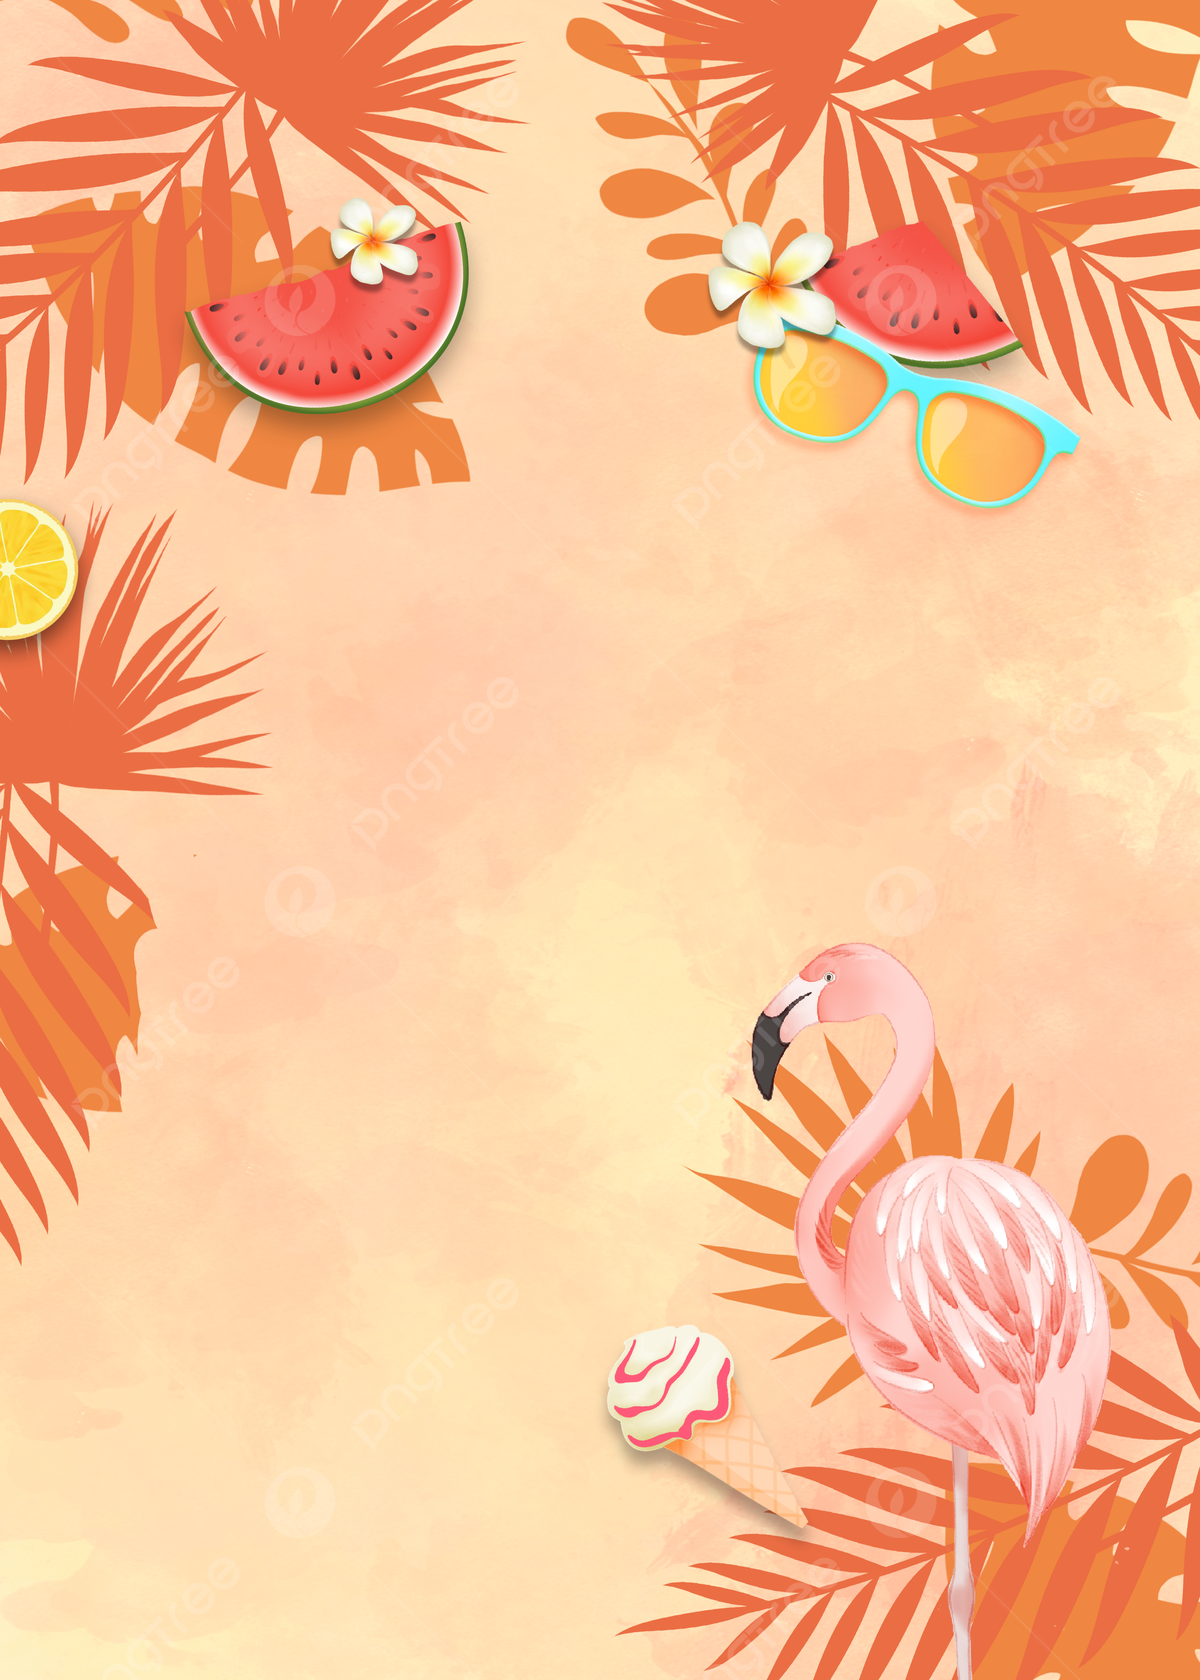 Watercolor Background Flamingo Summer Wallpaper Image For Free Download